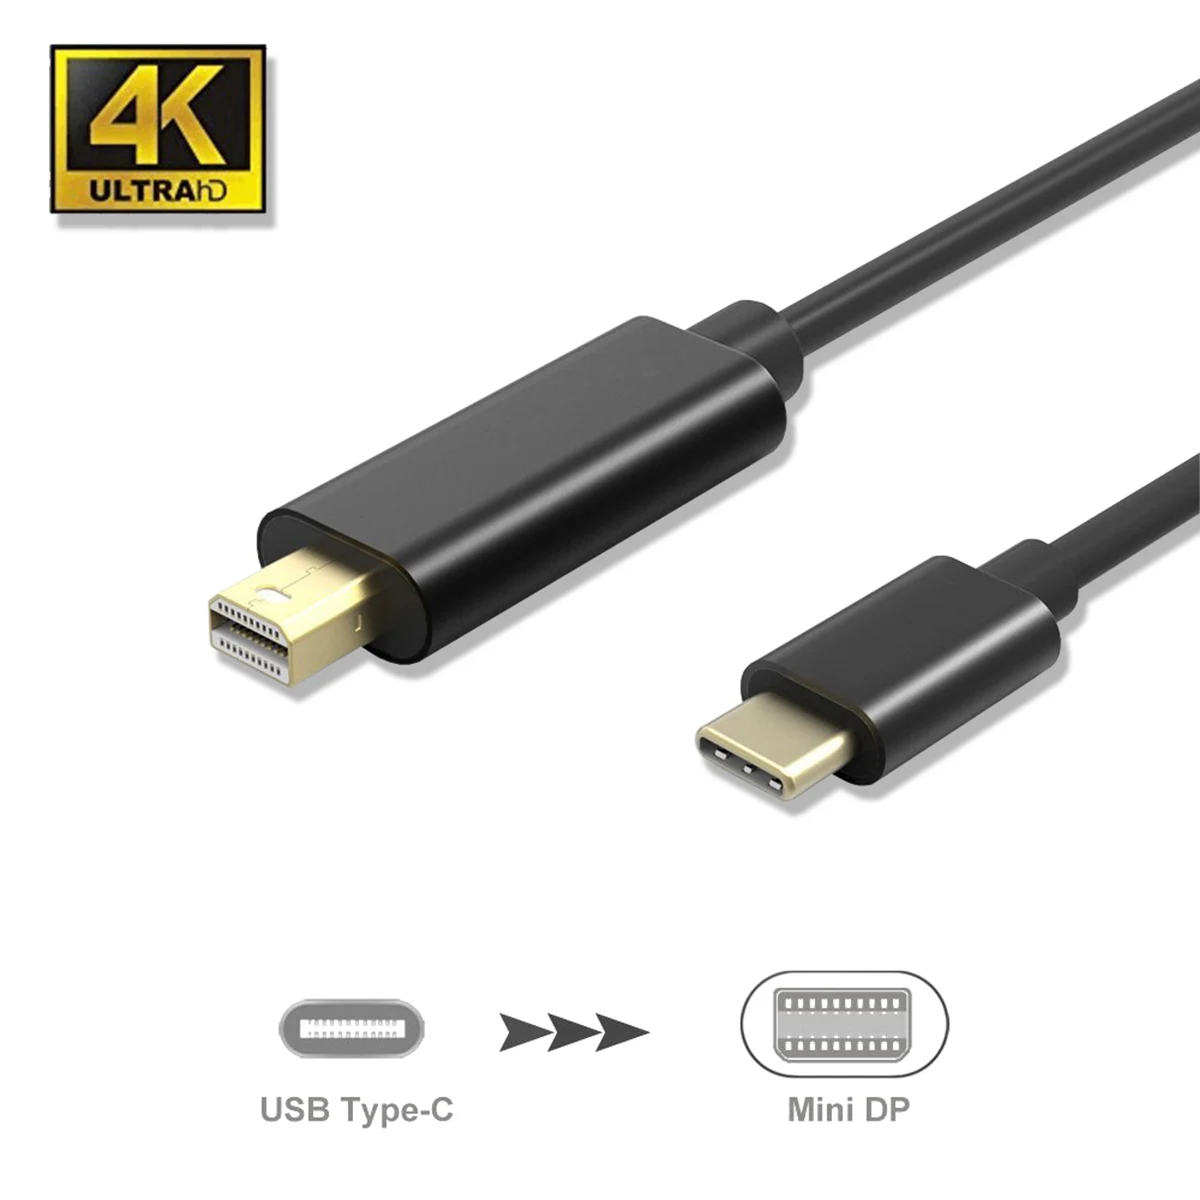 

USB C to Mini DisplayPort Cable 4K60HZ 1.8m/6ft USB Type-C to DP Adapter Thunderbolt 3 to Mini DP Cable Cord for MacBook